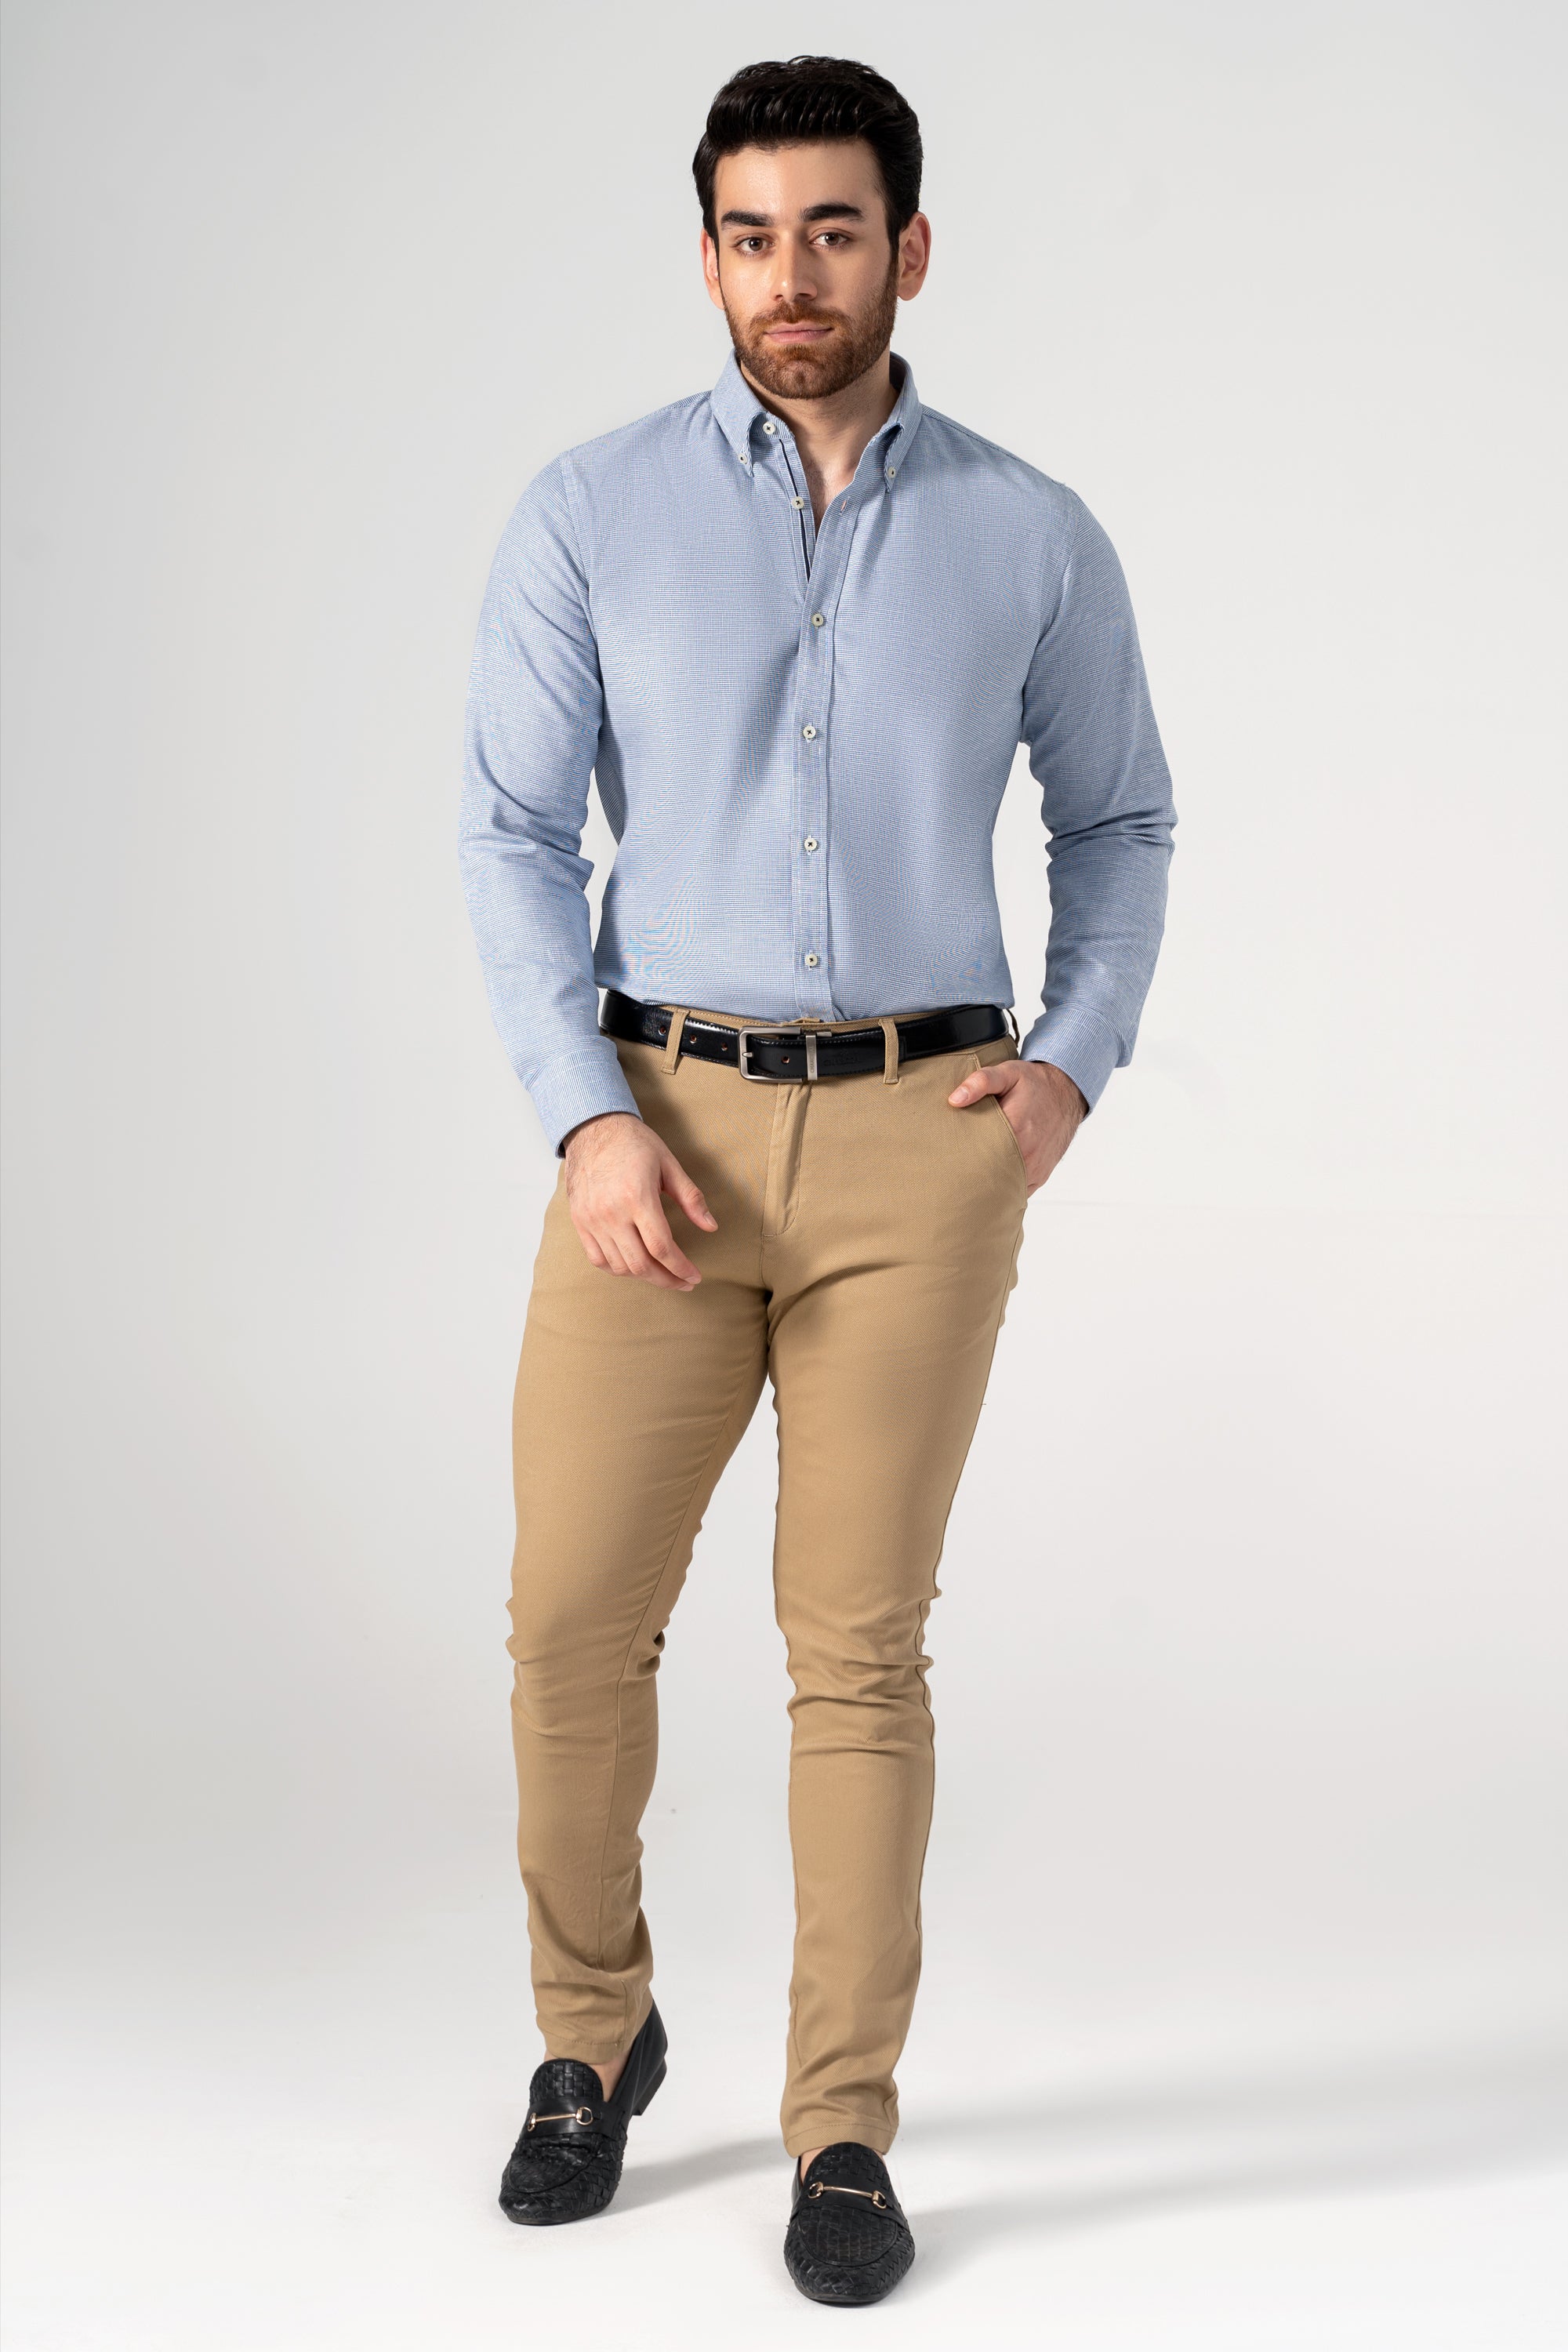 What Colour Shirts To Wear With Khaki Pants: 6 Foolproof Options